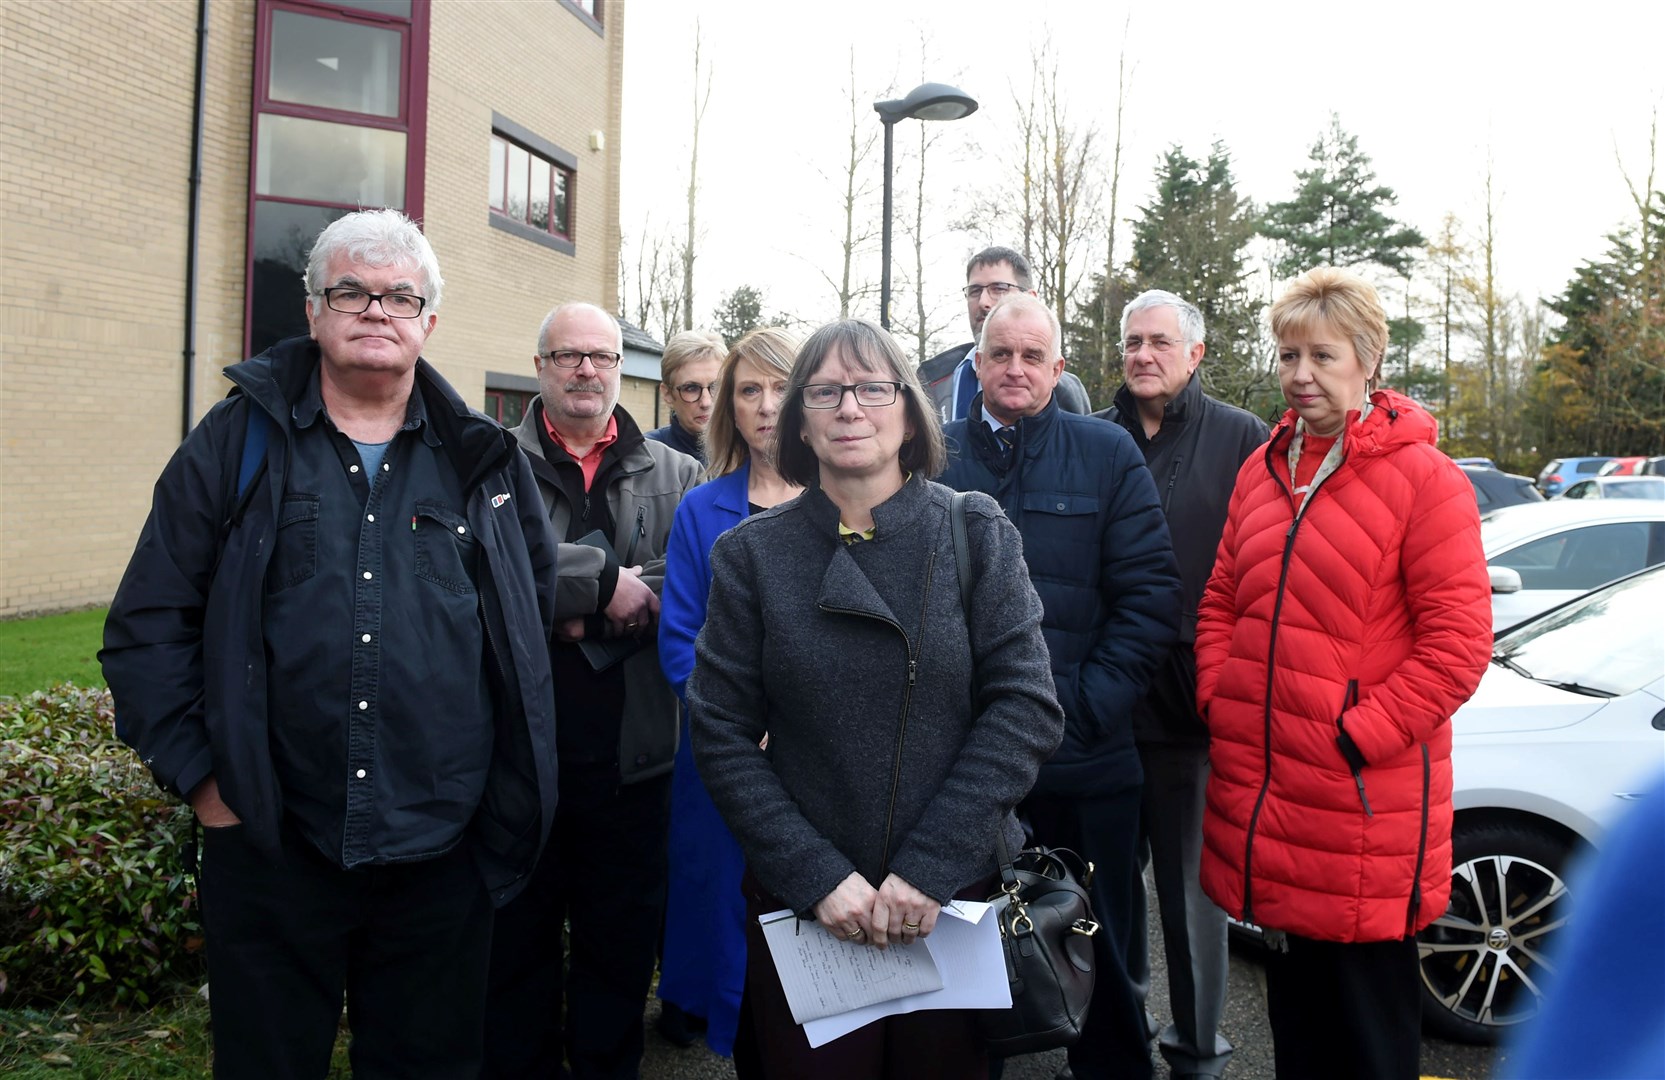 Whistle-blowers and victims of bullying staged a protest outside NHS Highland headquarters.